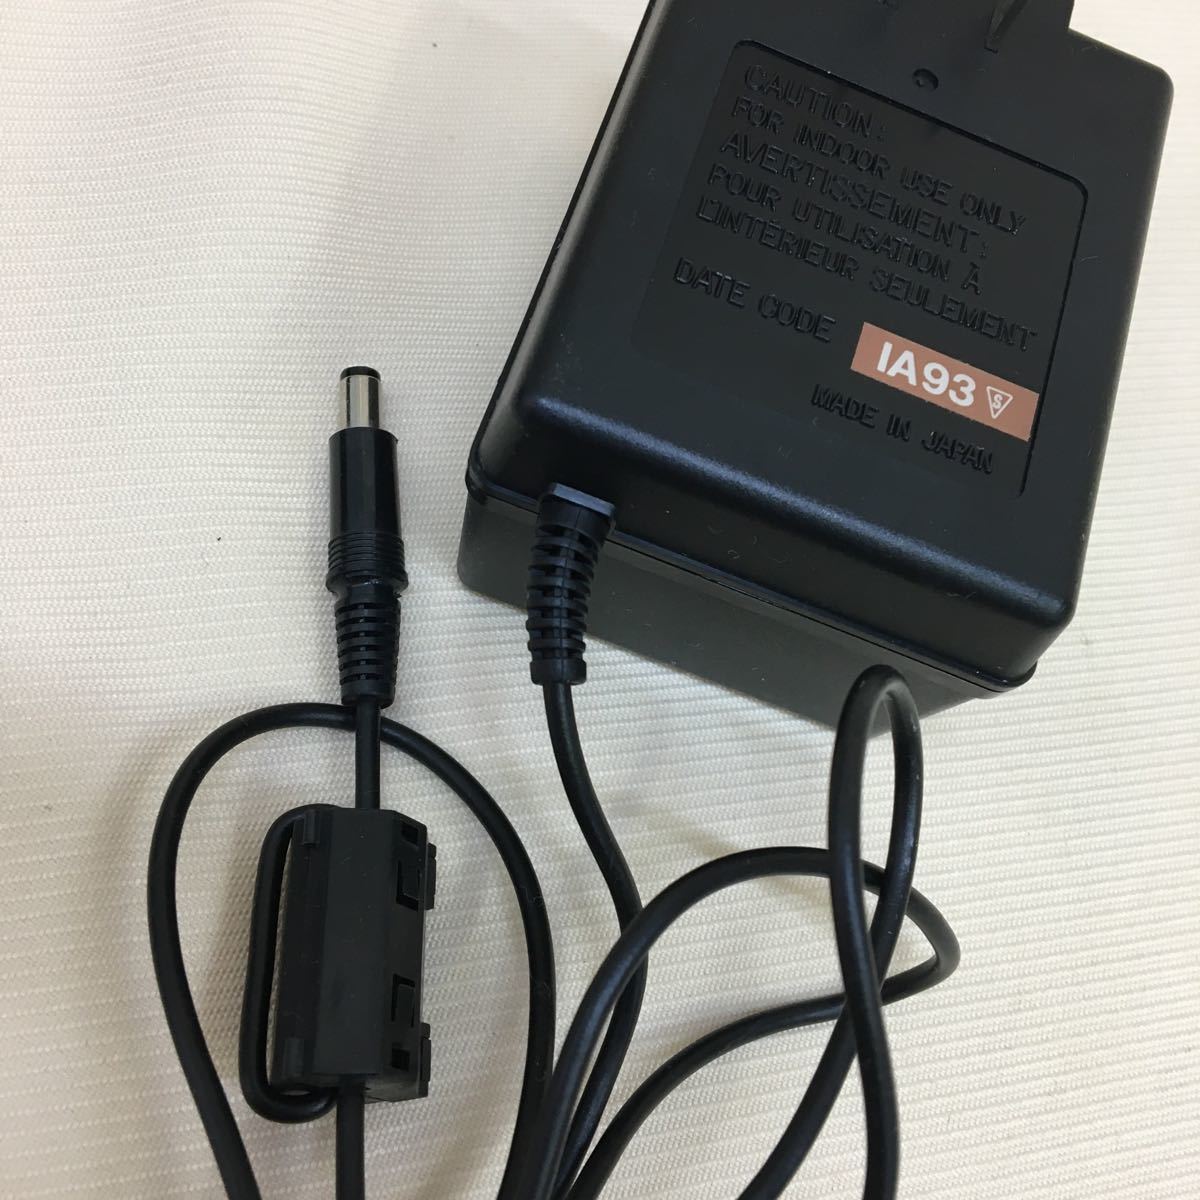 0a2020 OMRON Omron SCANNER SERIES 7575509-5A HS20 40 60 series exclusive use 91-37758 13V 1A AC adaptor AC adapter operation goods 